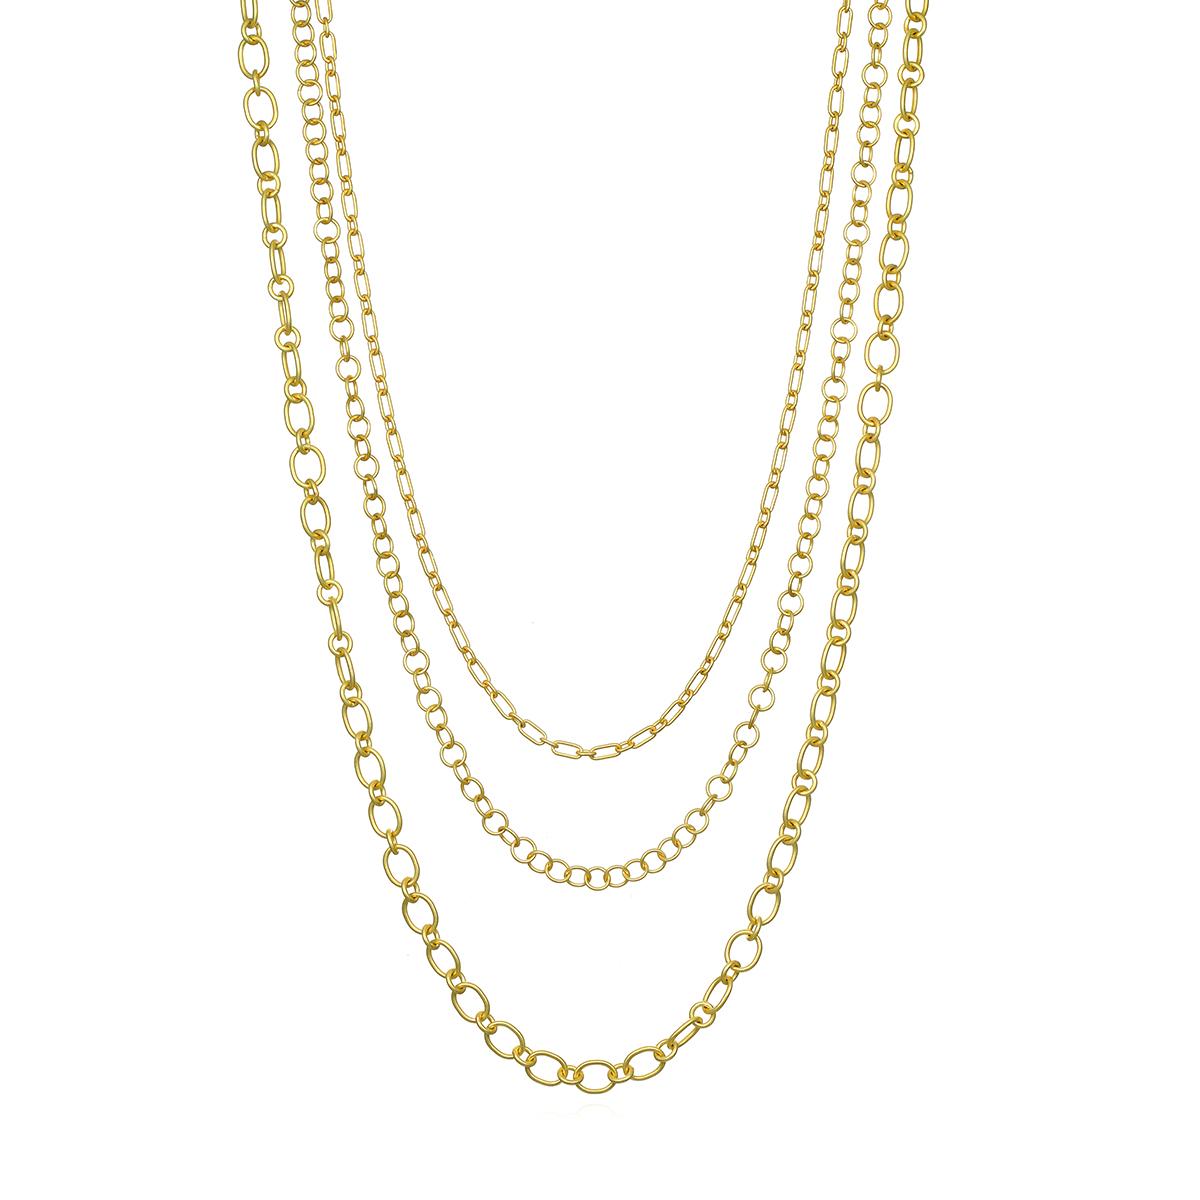 Contemporary Faye Kim 18 Karat Gold Mini Paperclip Vintage Link Chain For Sale